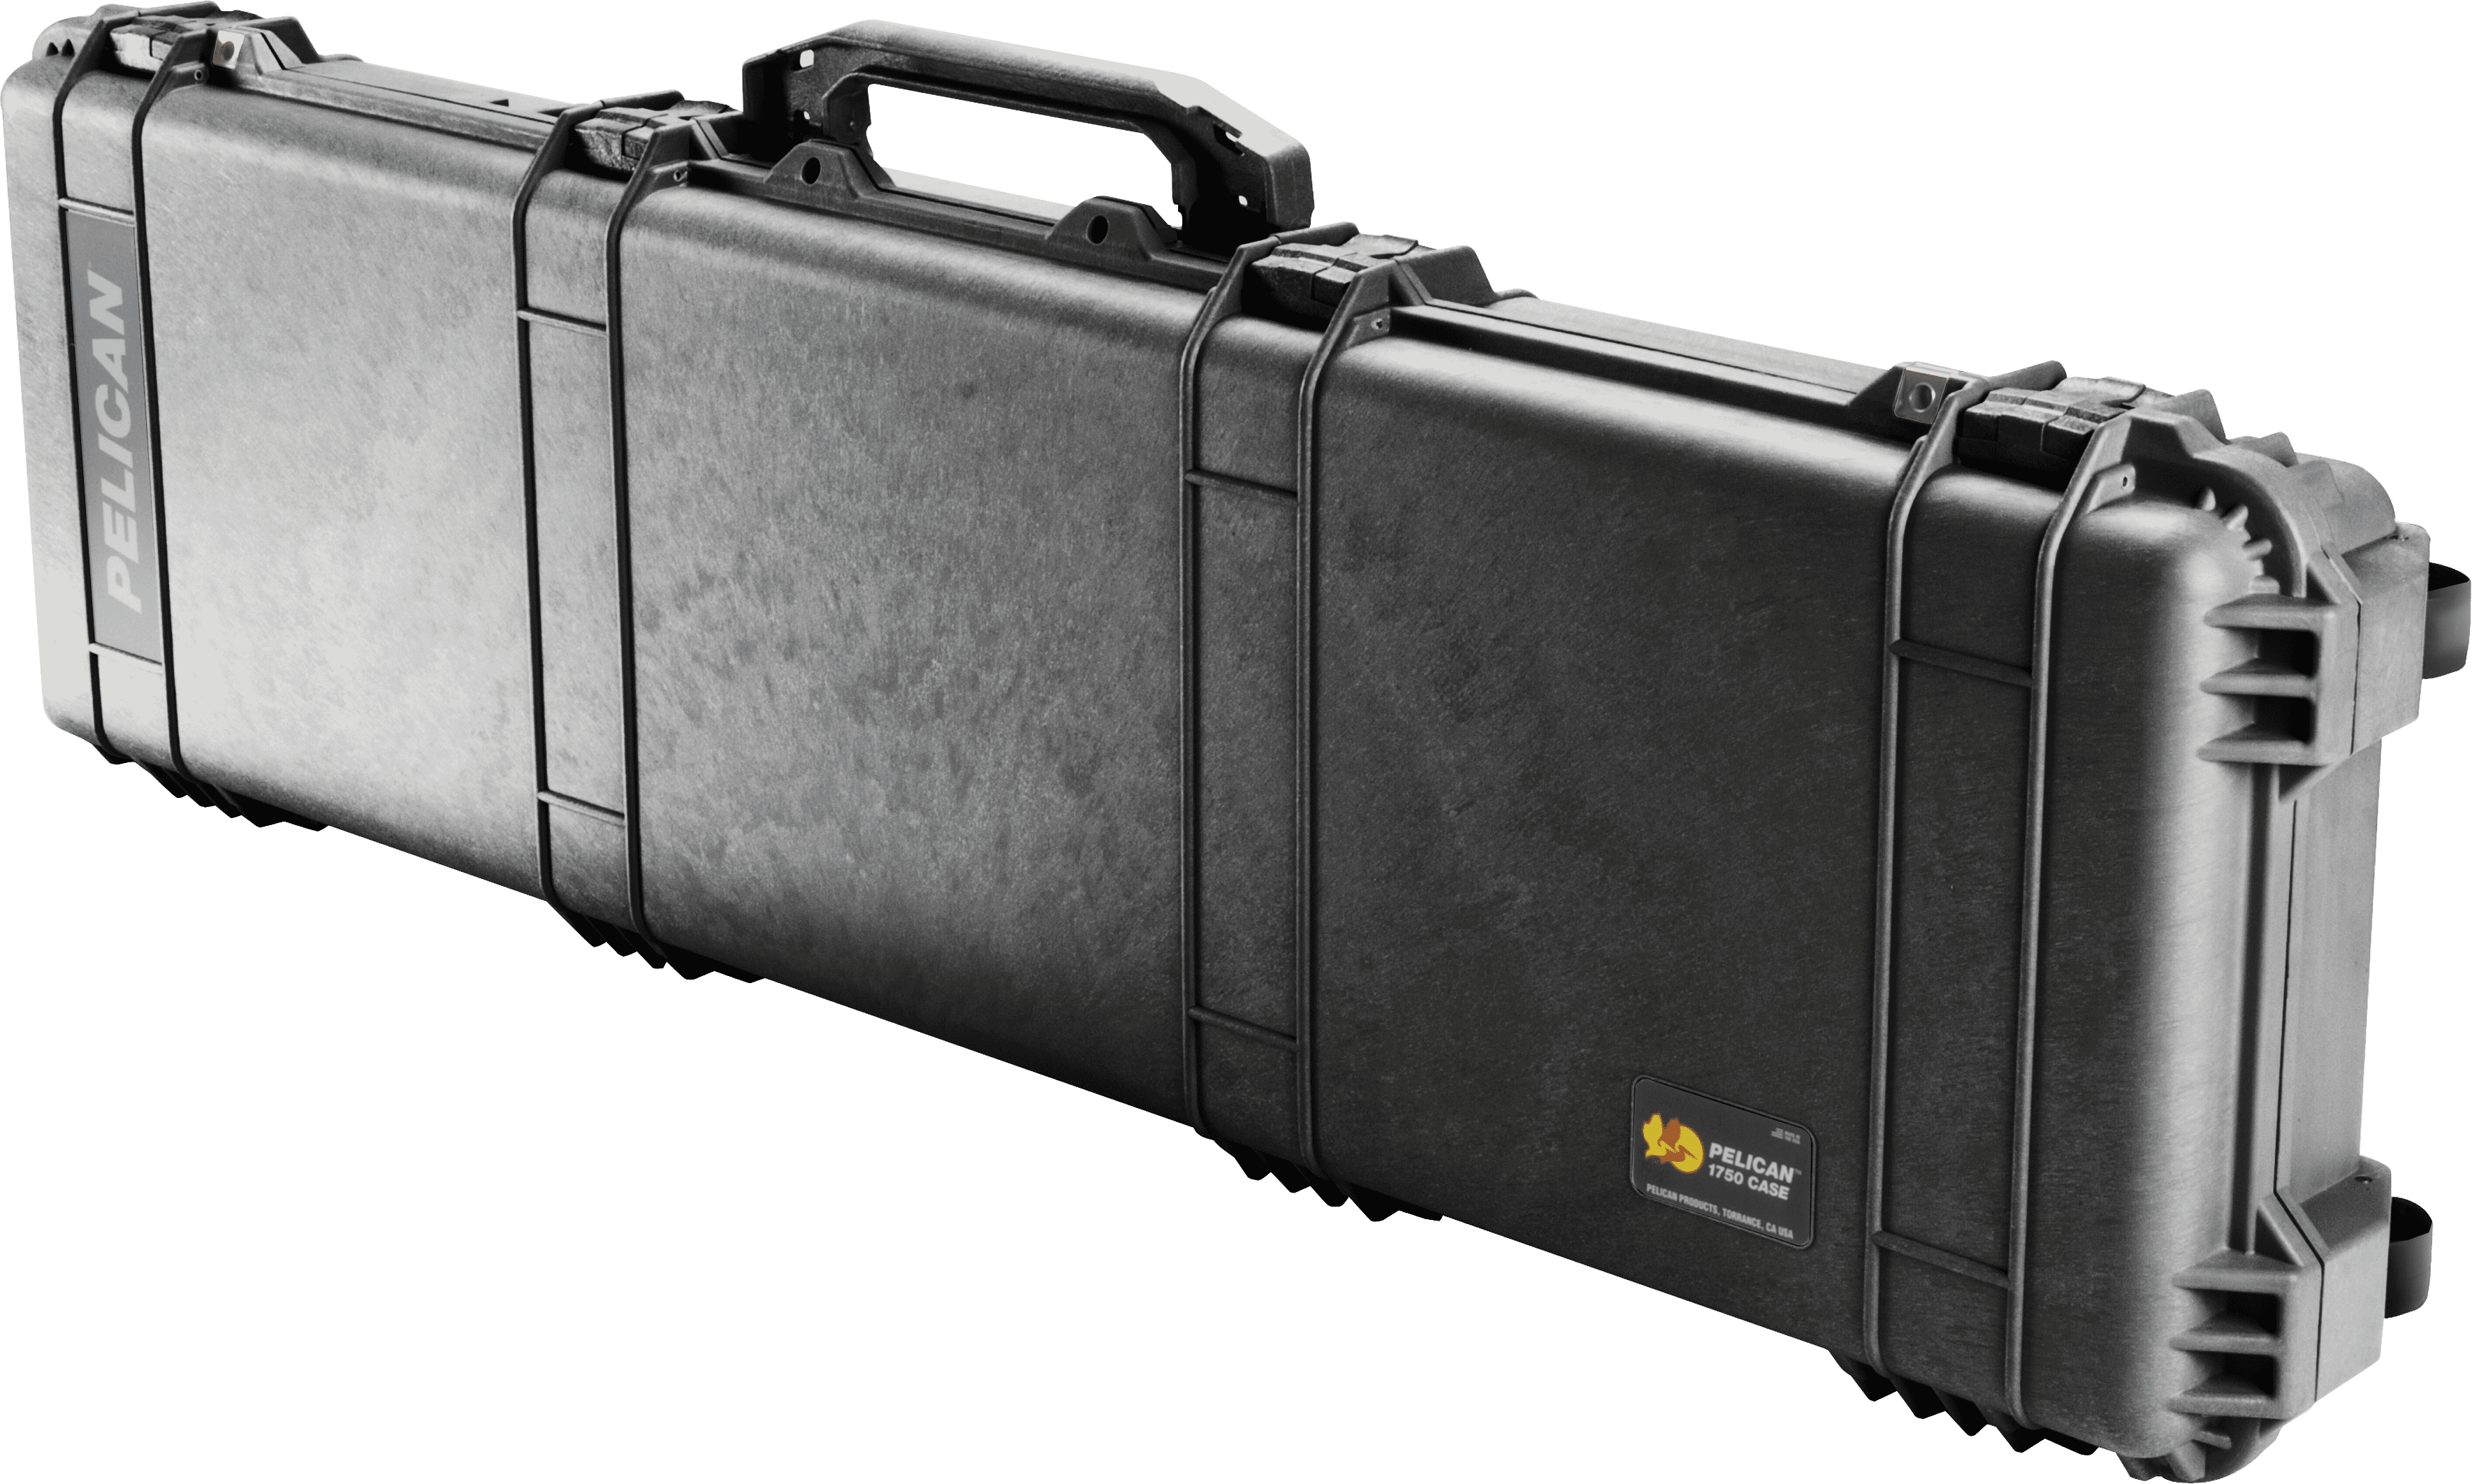 Pelican Products 1750 Protector Long Case - Range Bags and Gun Cases